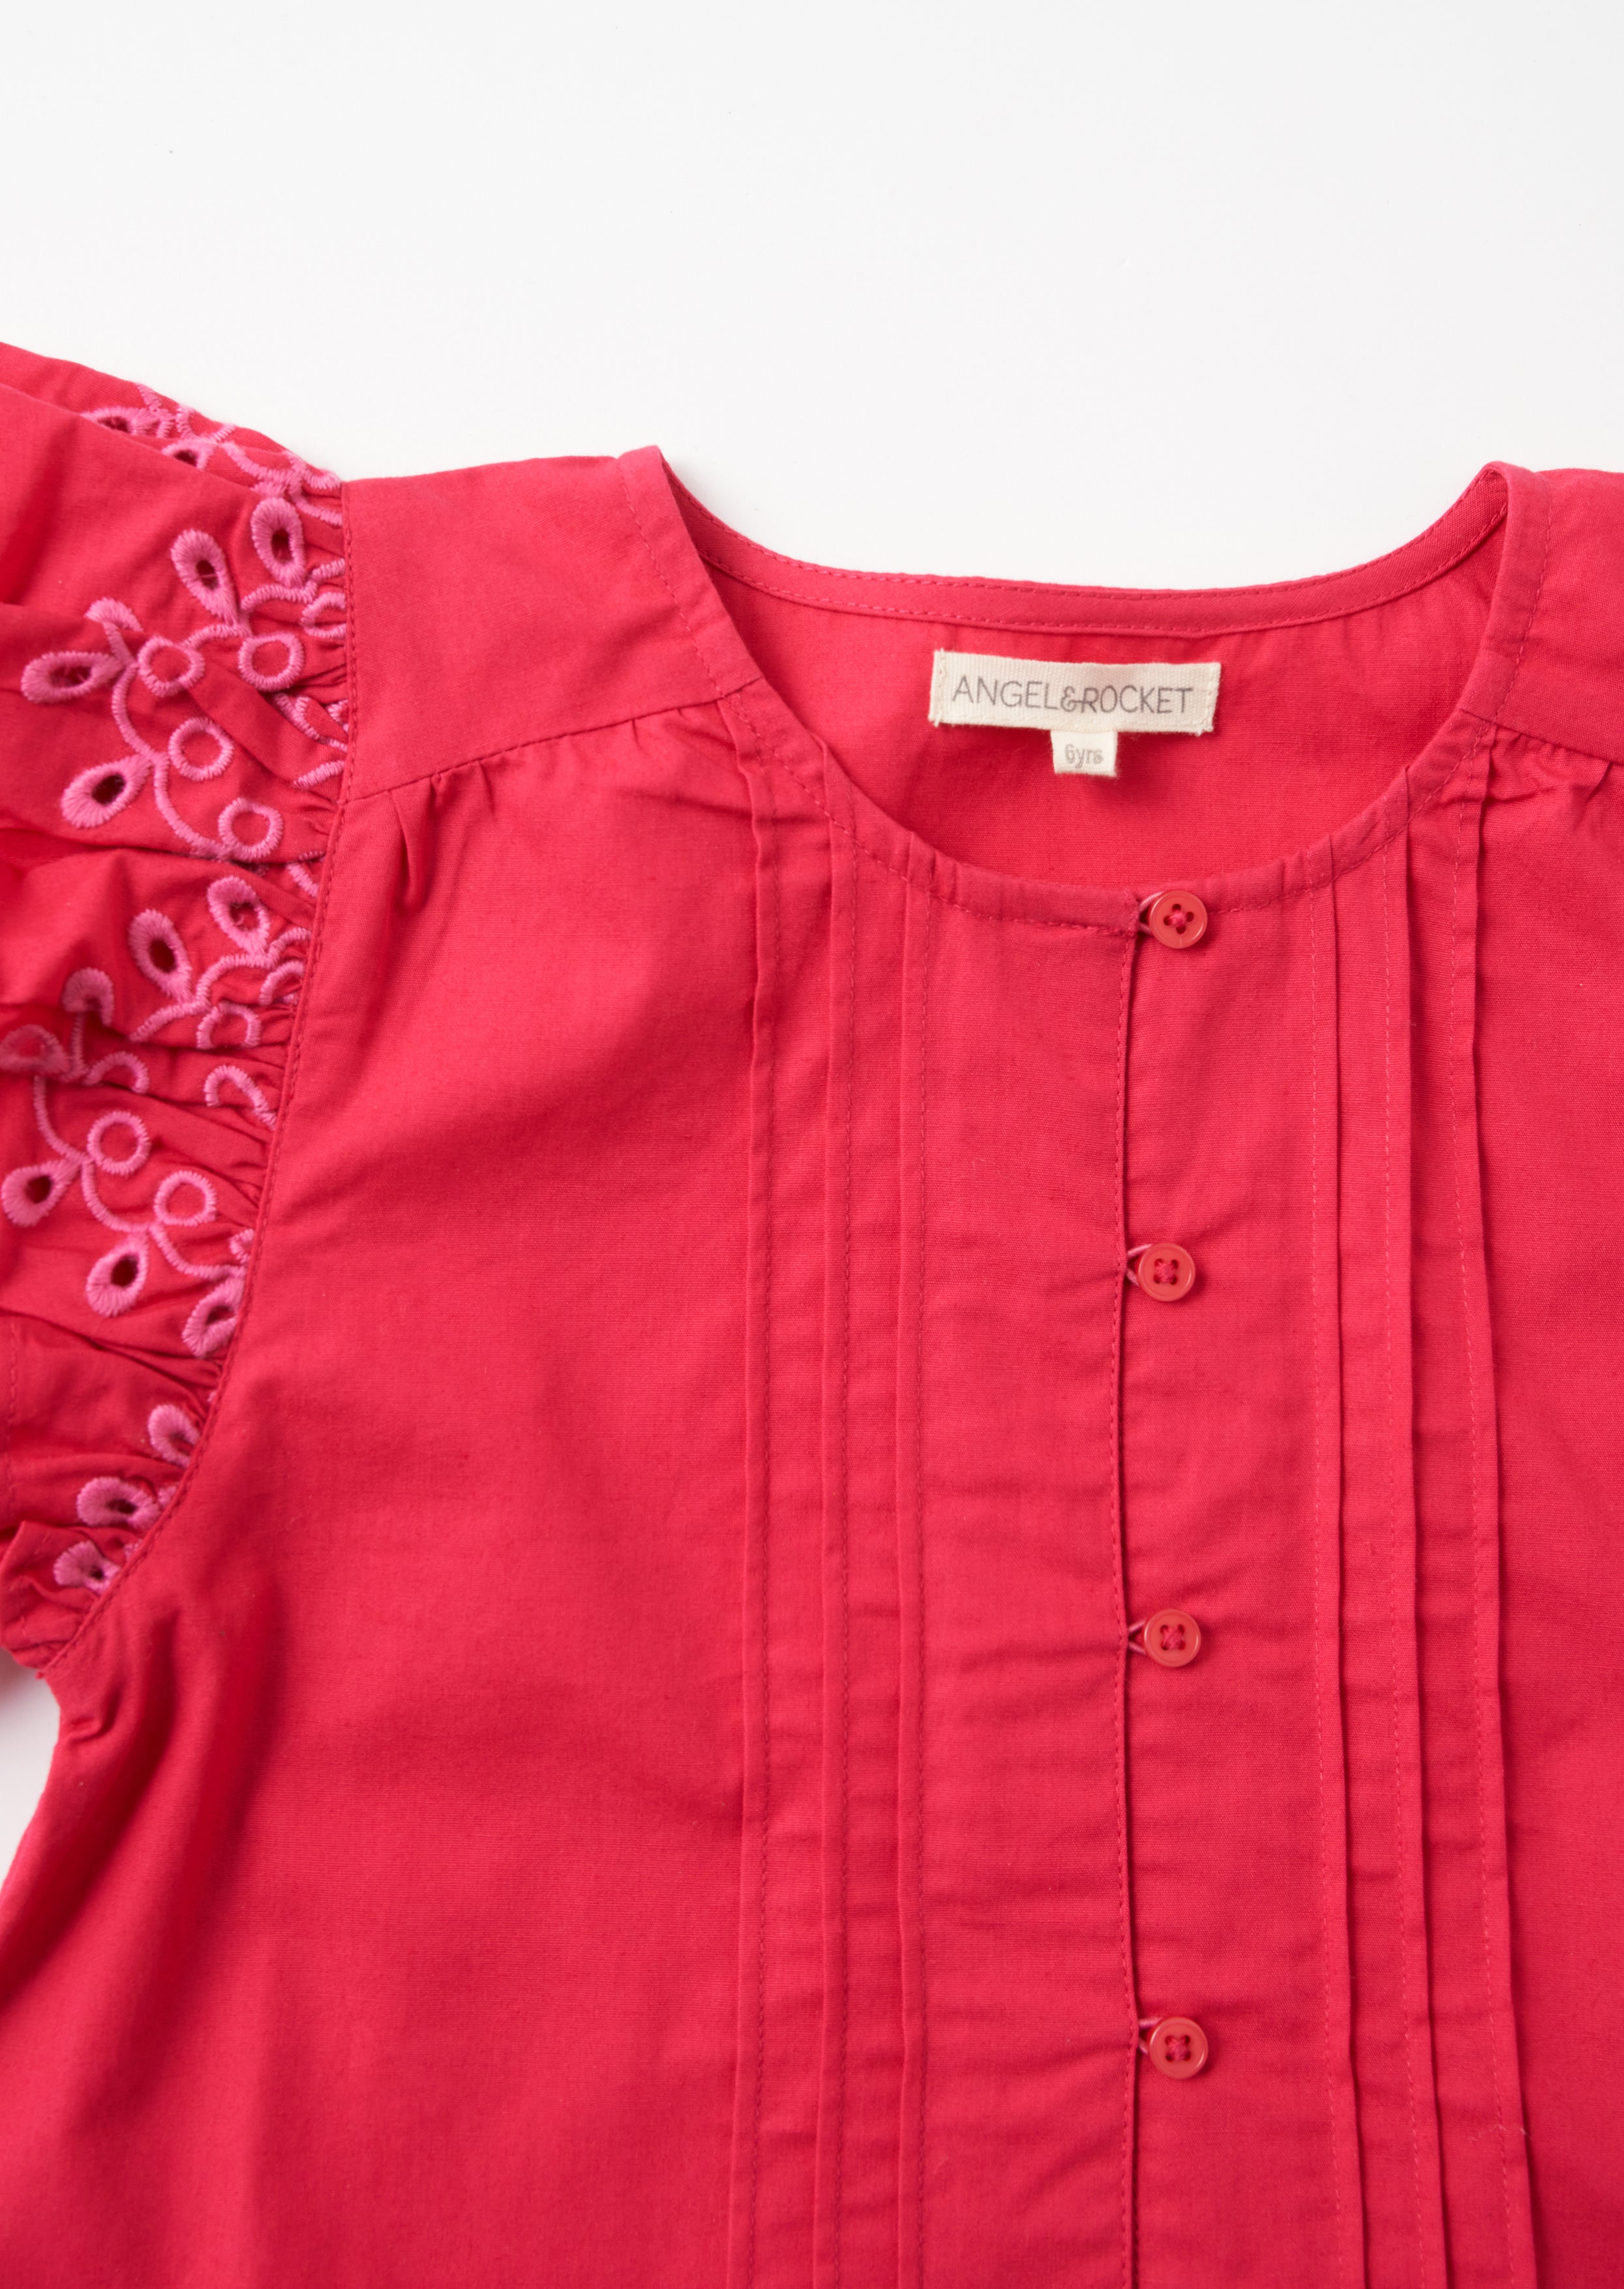 Girls Floral Embroidered Cotton Pink Top with Puff Sleeves